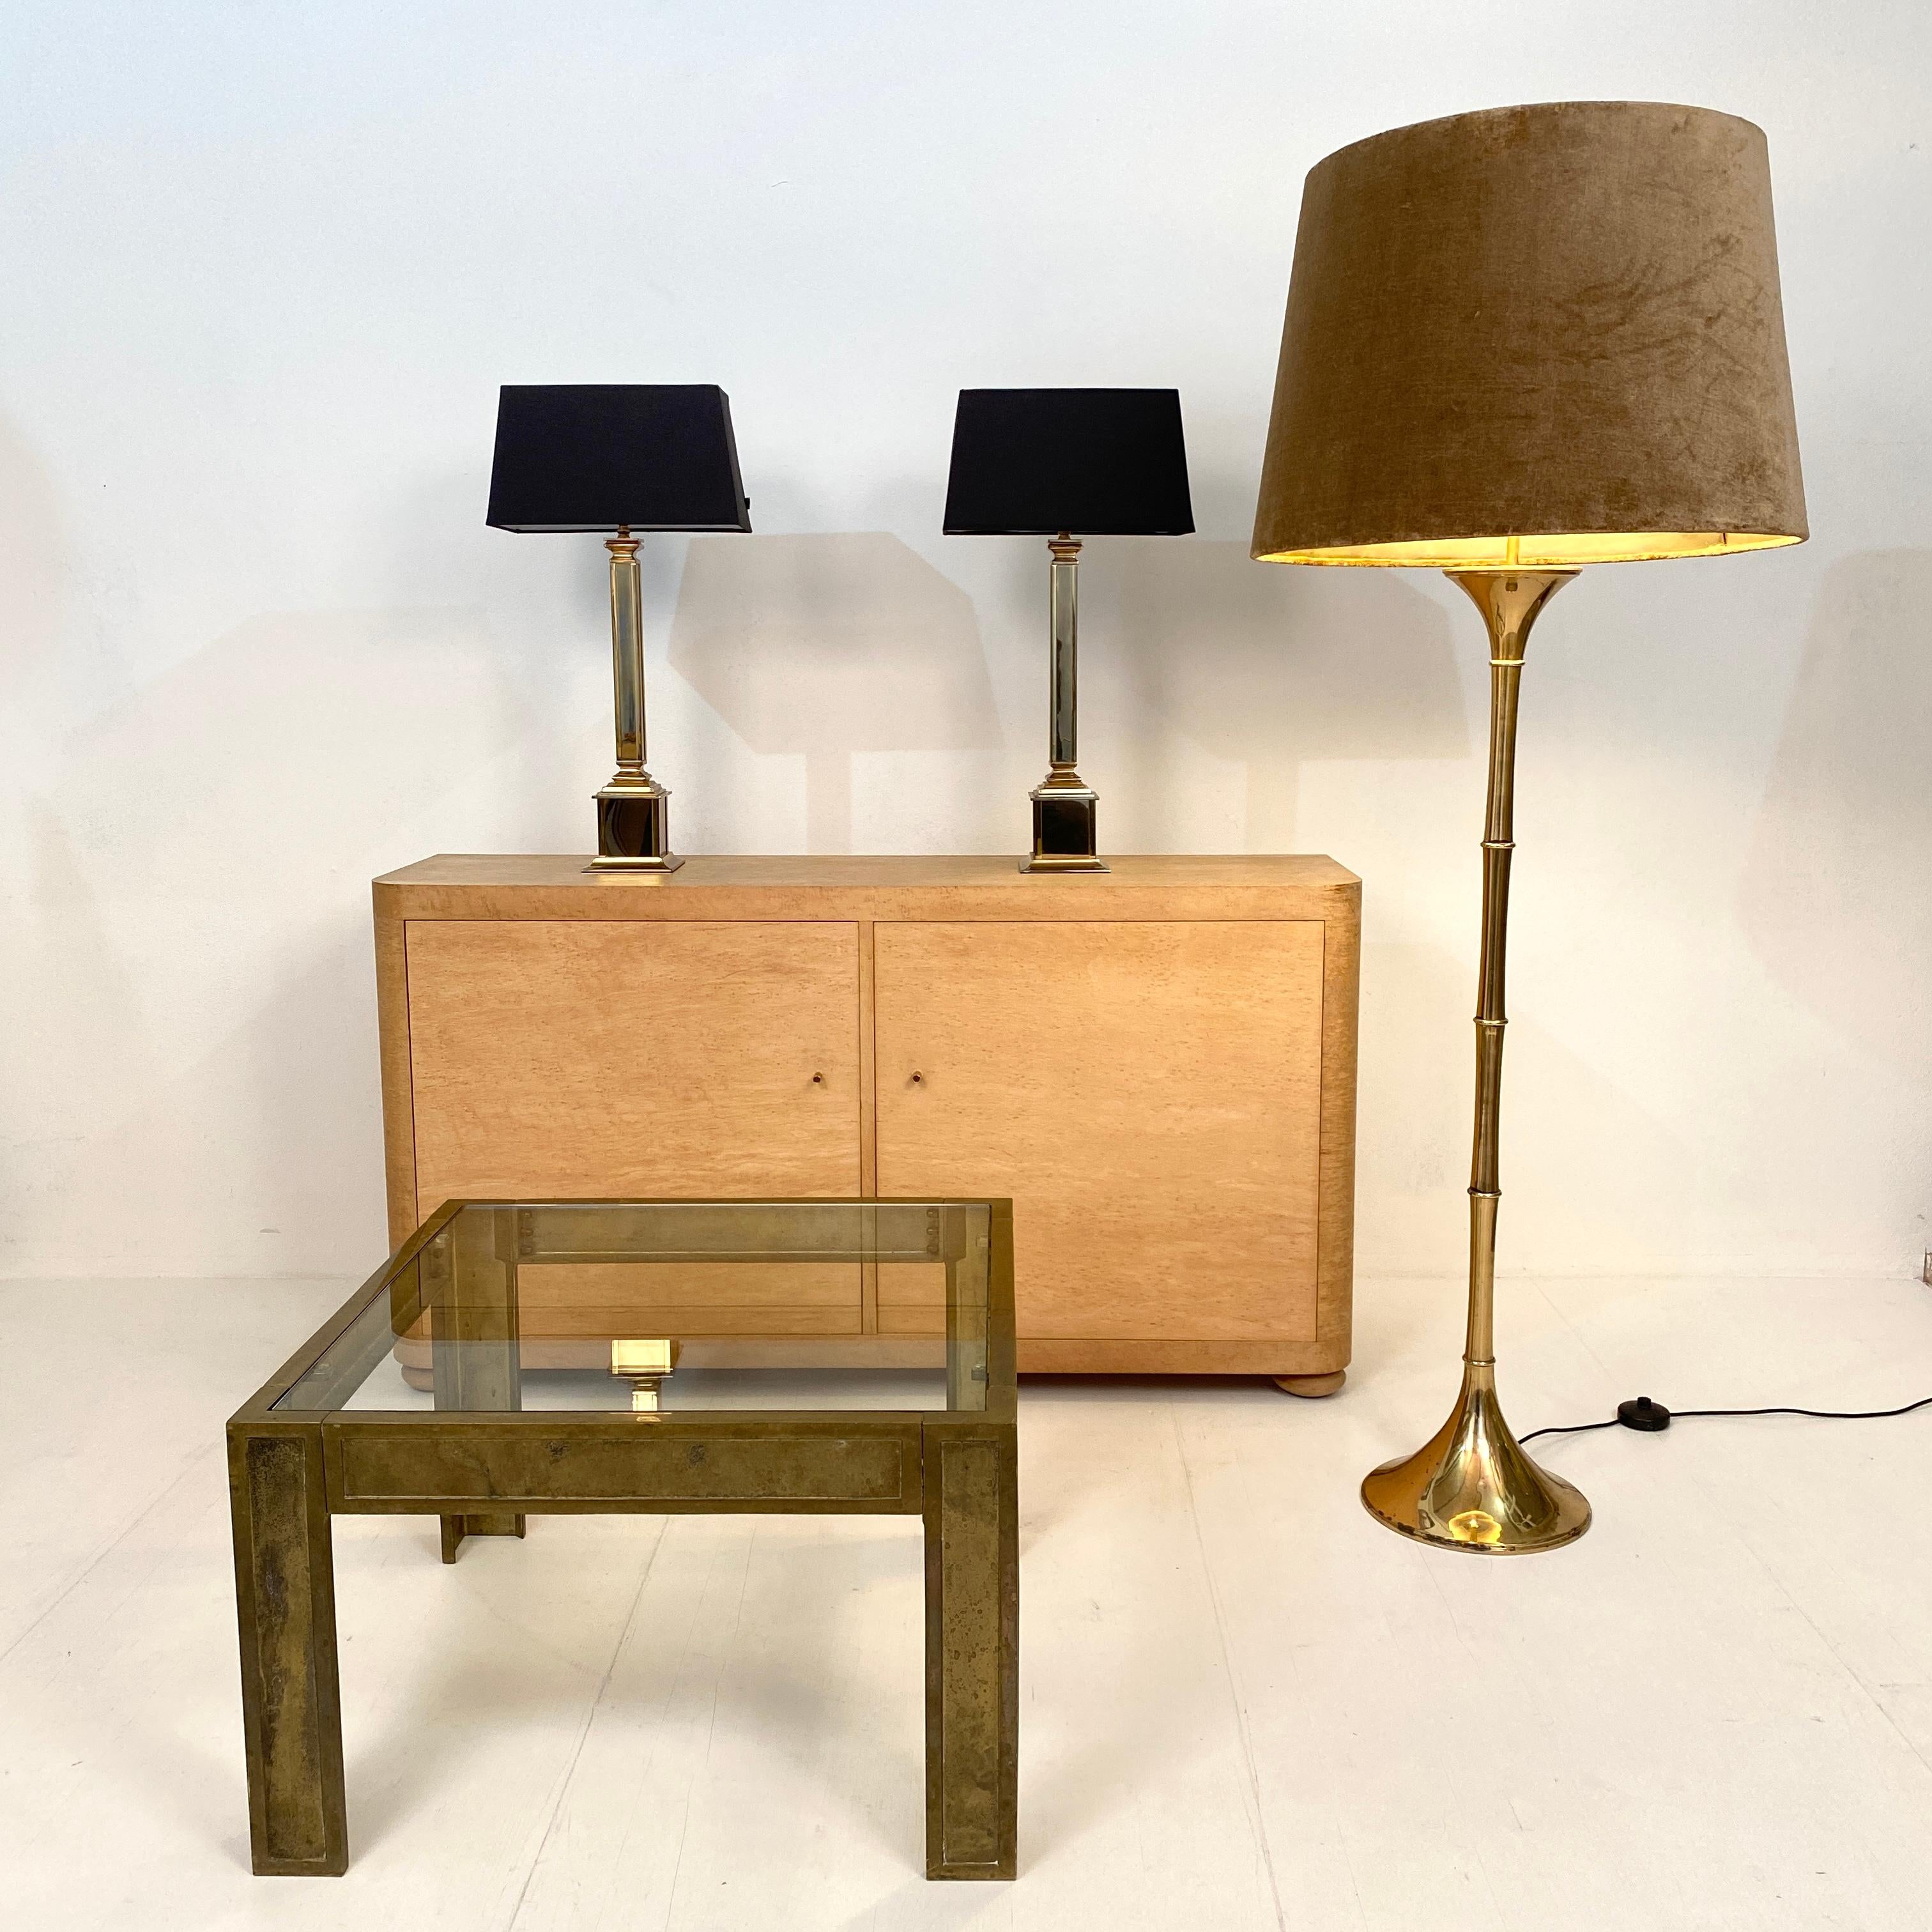 Mid-Century Modern Pair of German Midcentury Gilded Brass Table Lamps with Black Lamp Shades, 1970